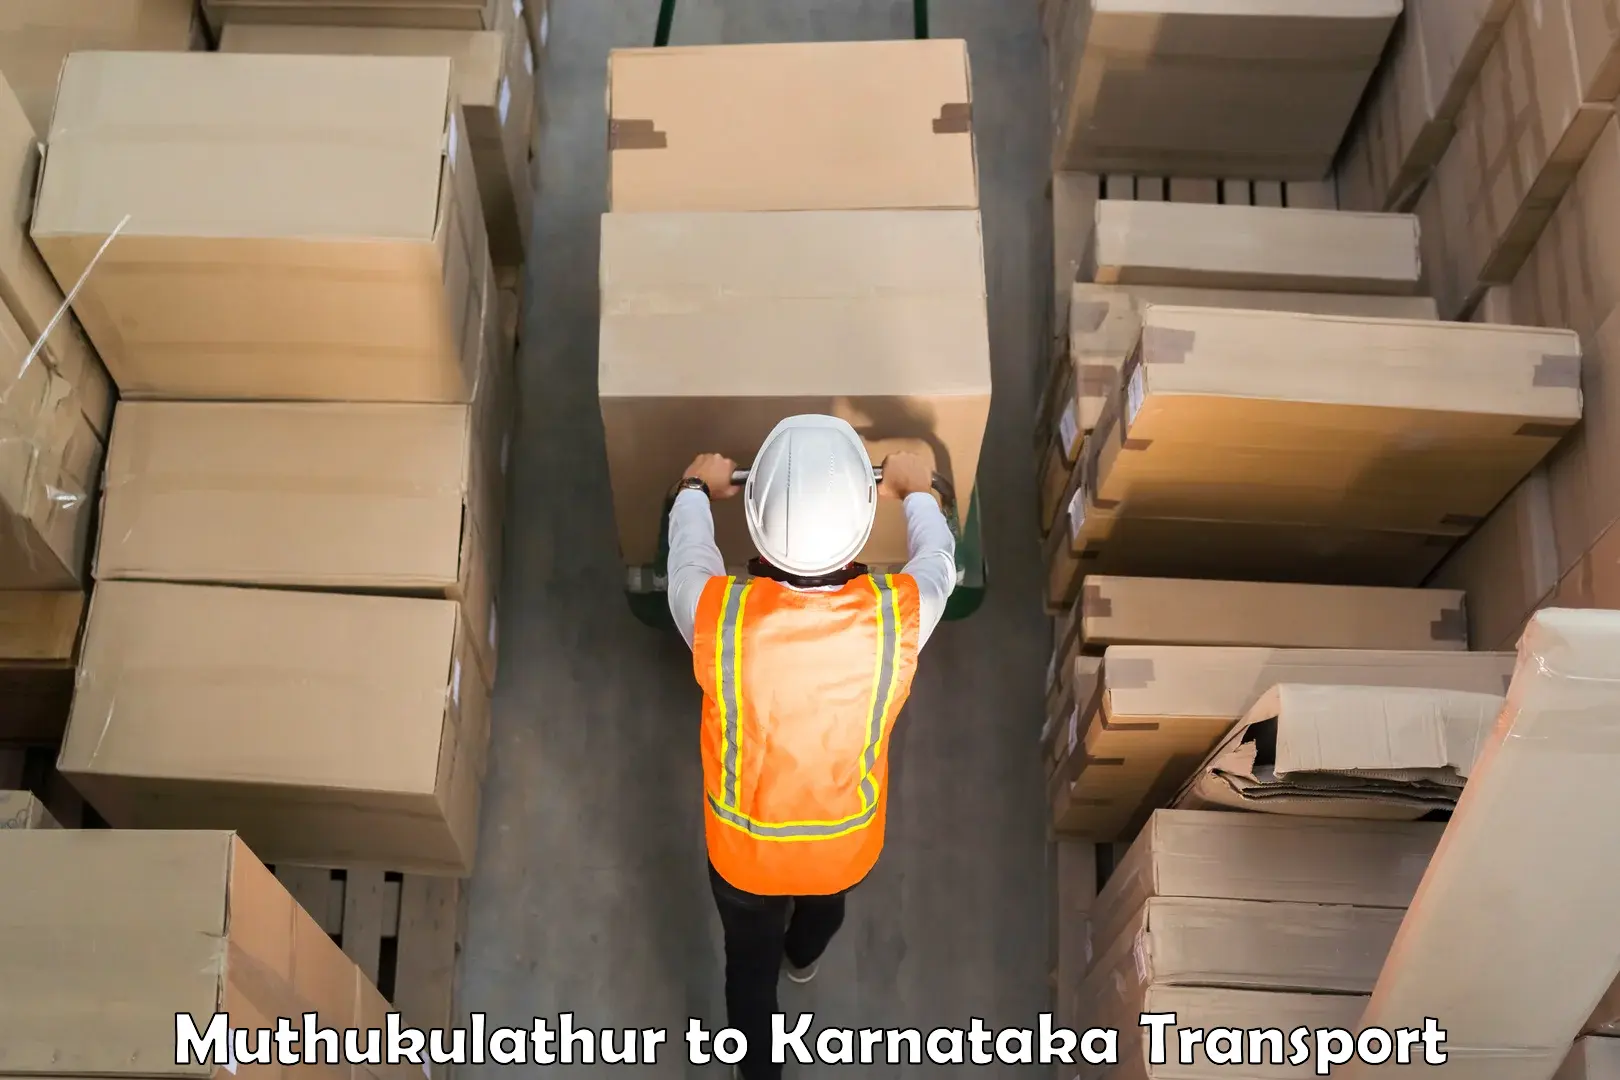 Part load transport service in India Muthukulathur to Bengaluru